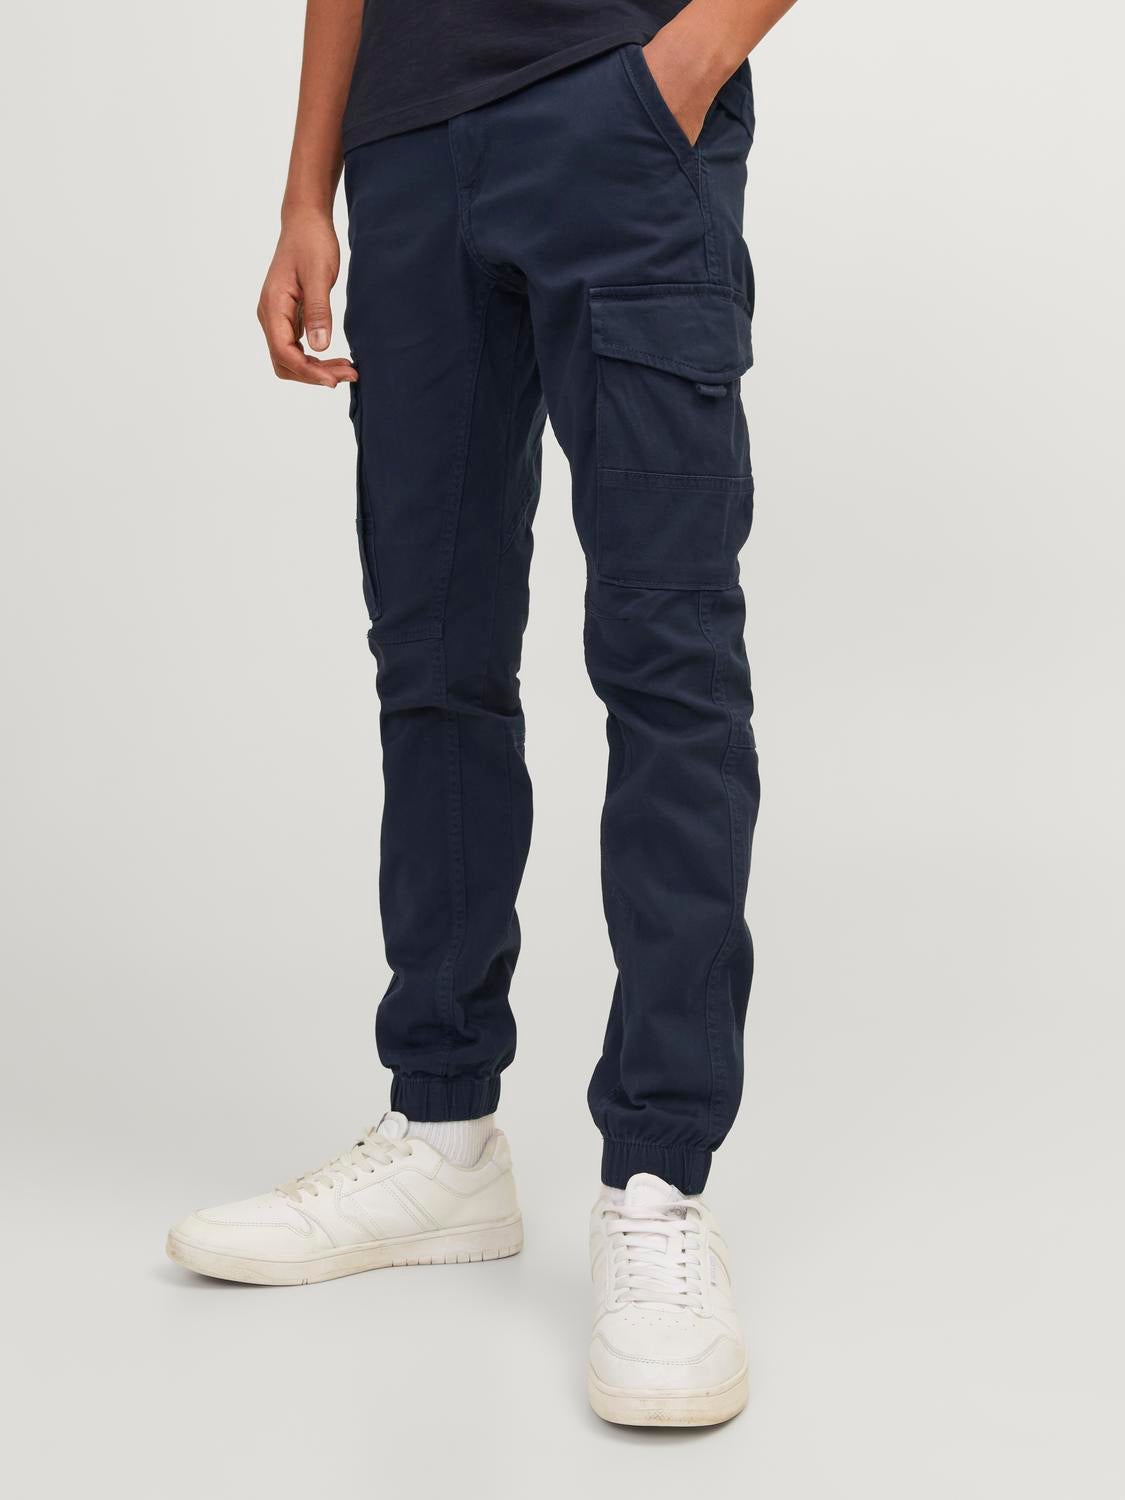 Jack And Jones Trousers - Buy Jack And Jones Trousers online in India